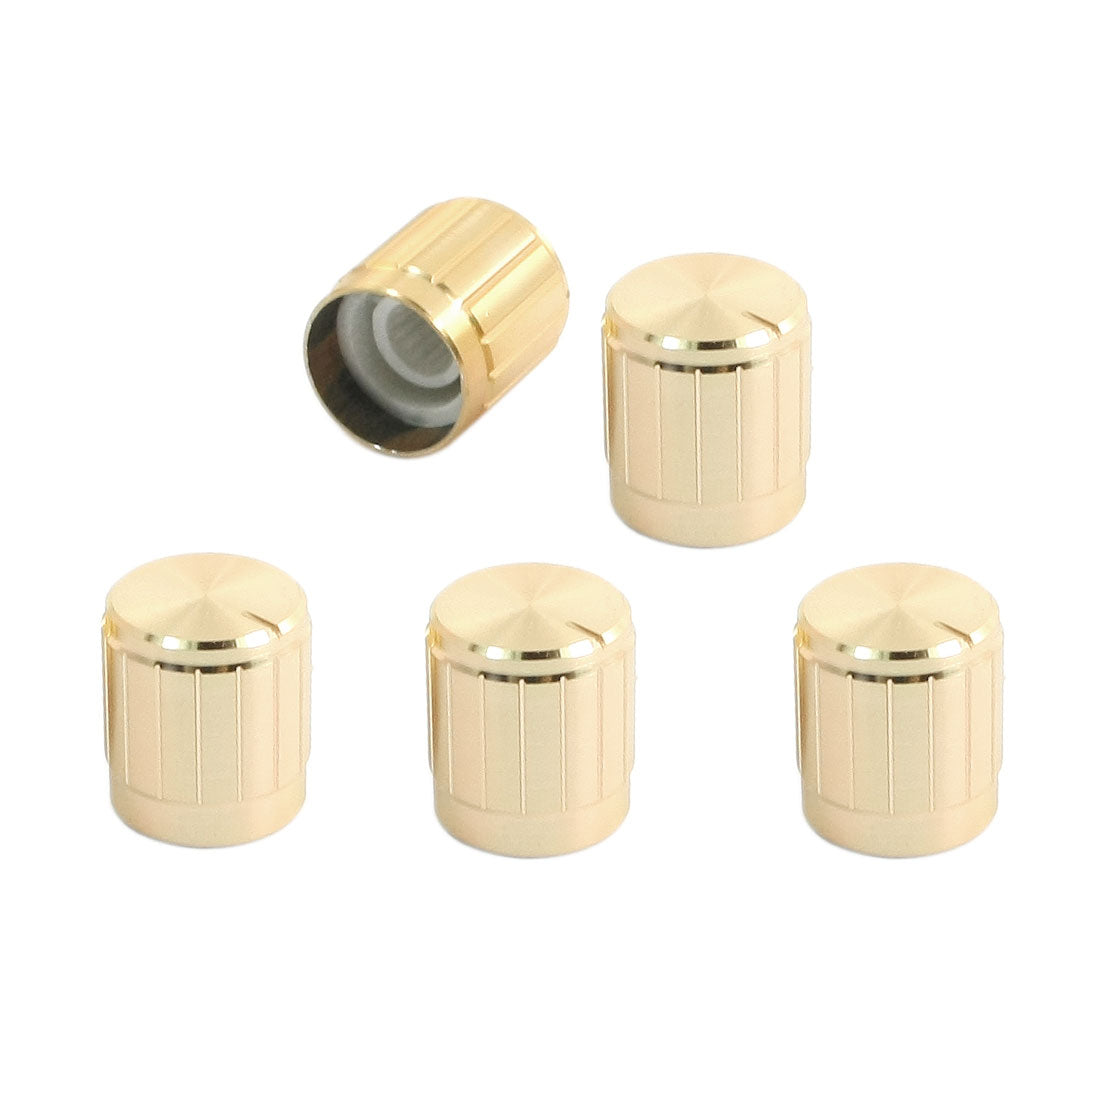 uxcell Uxcell 5PCS Gold Tone 15x16.5mm Volume Control Rotary Knobs for 6mm Knurled Shaft Potentiometer